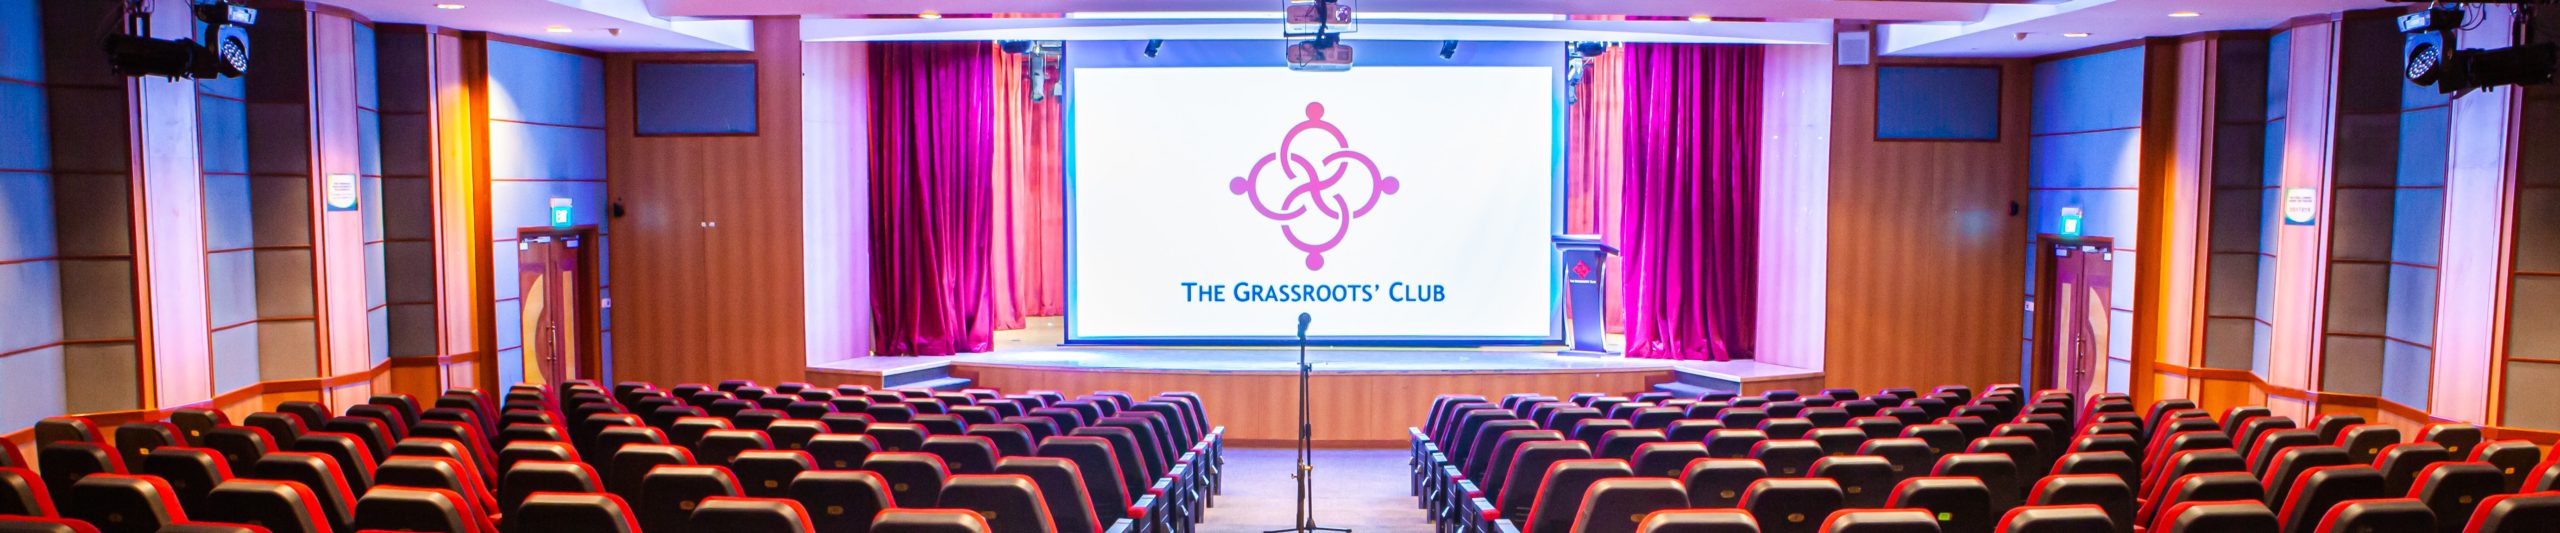 📣 The Grassroots’ Club Closure & Tenant Operating Hours 📣